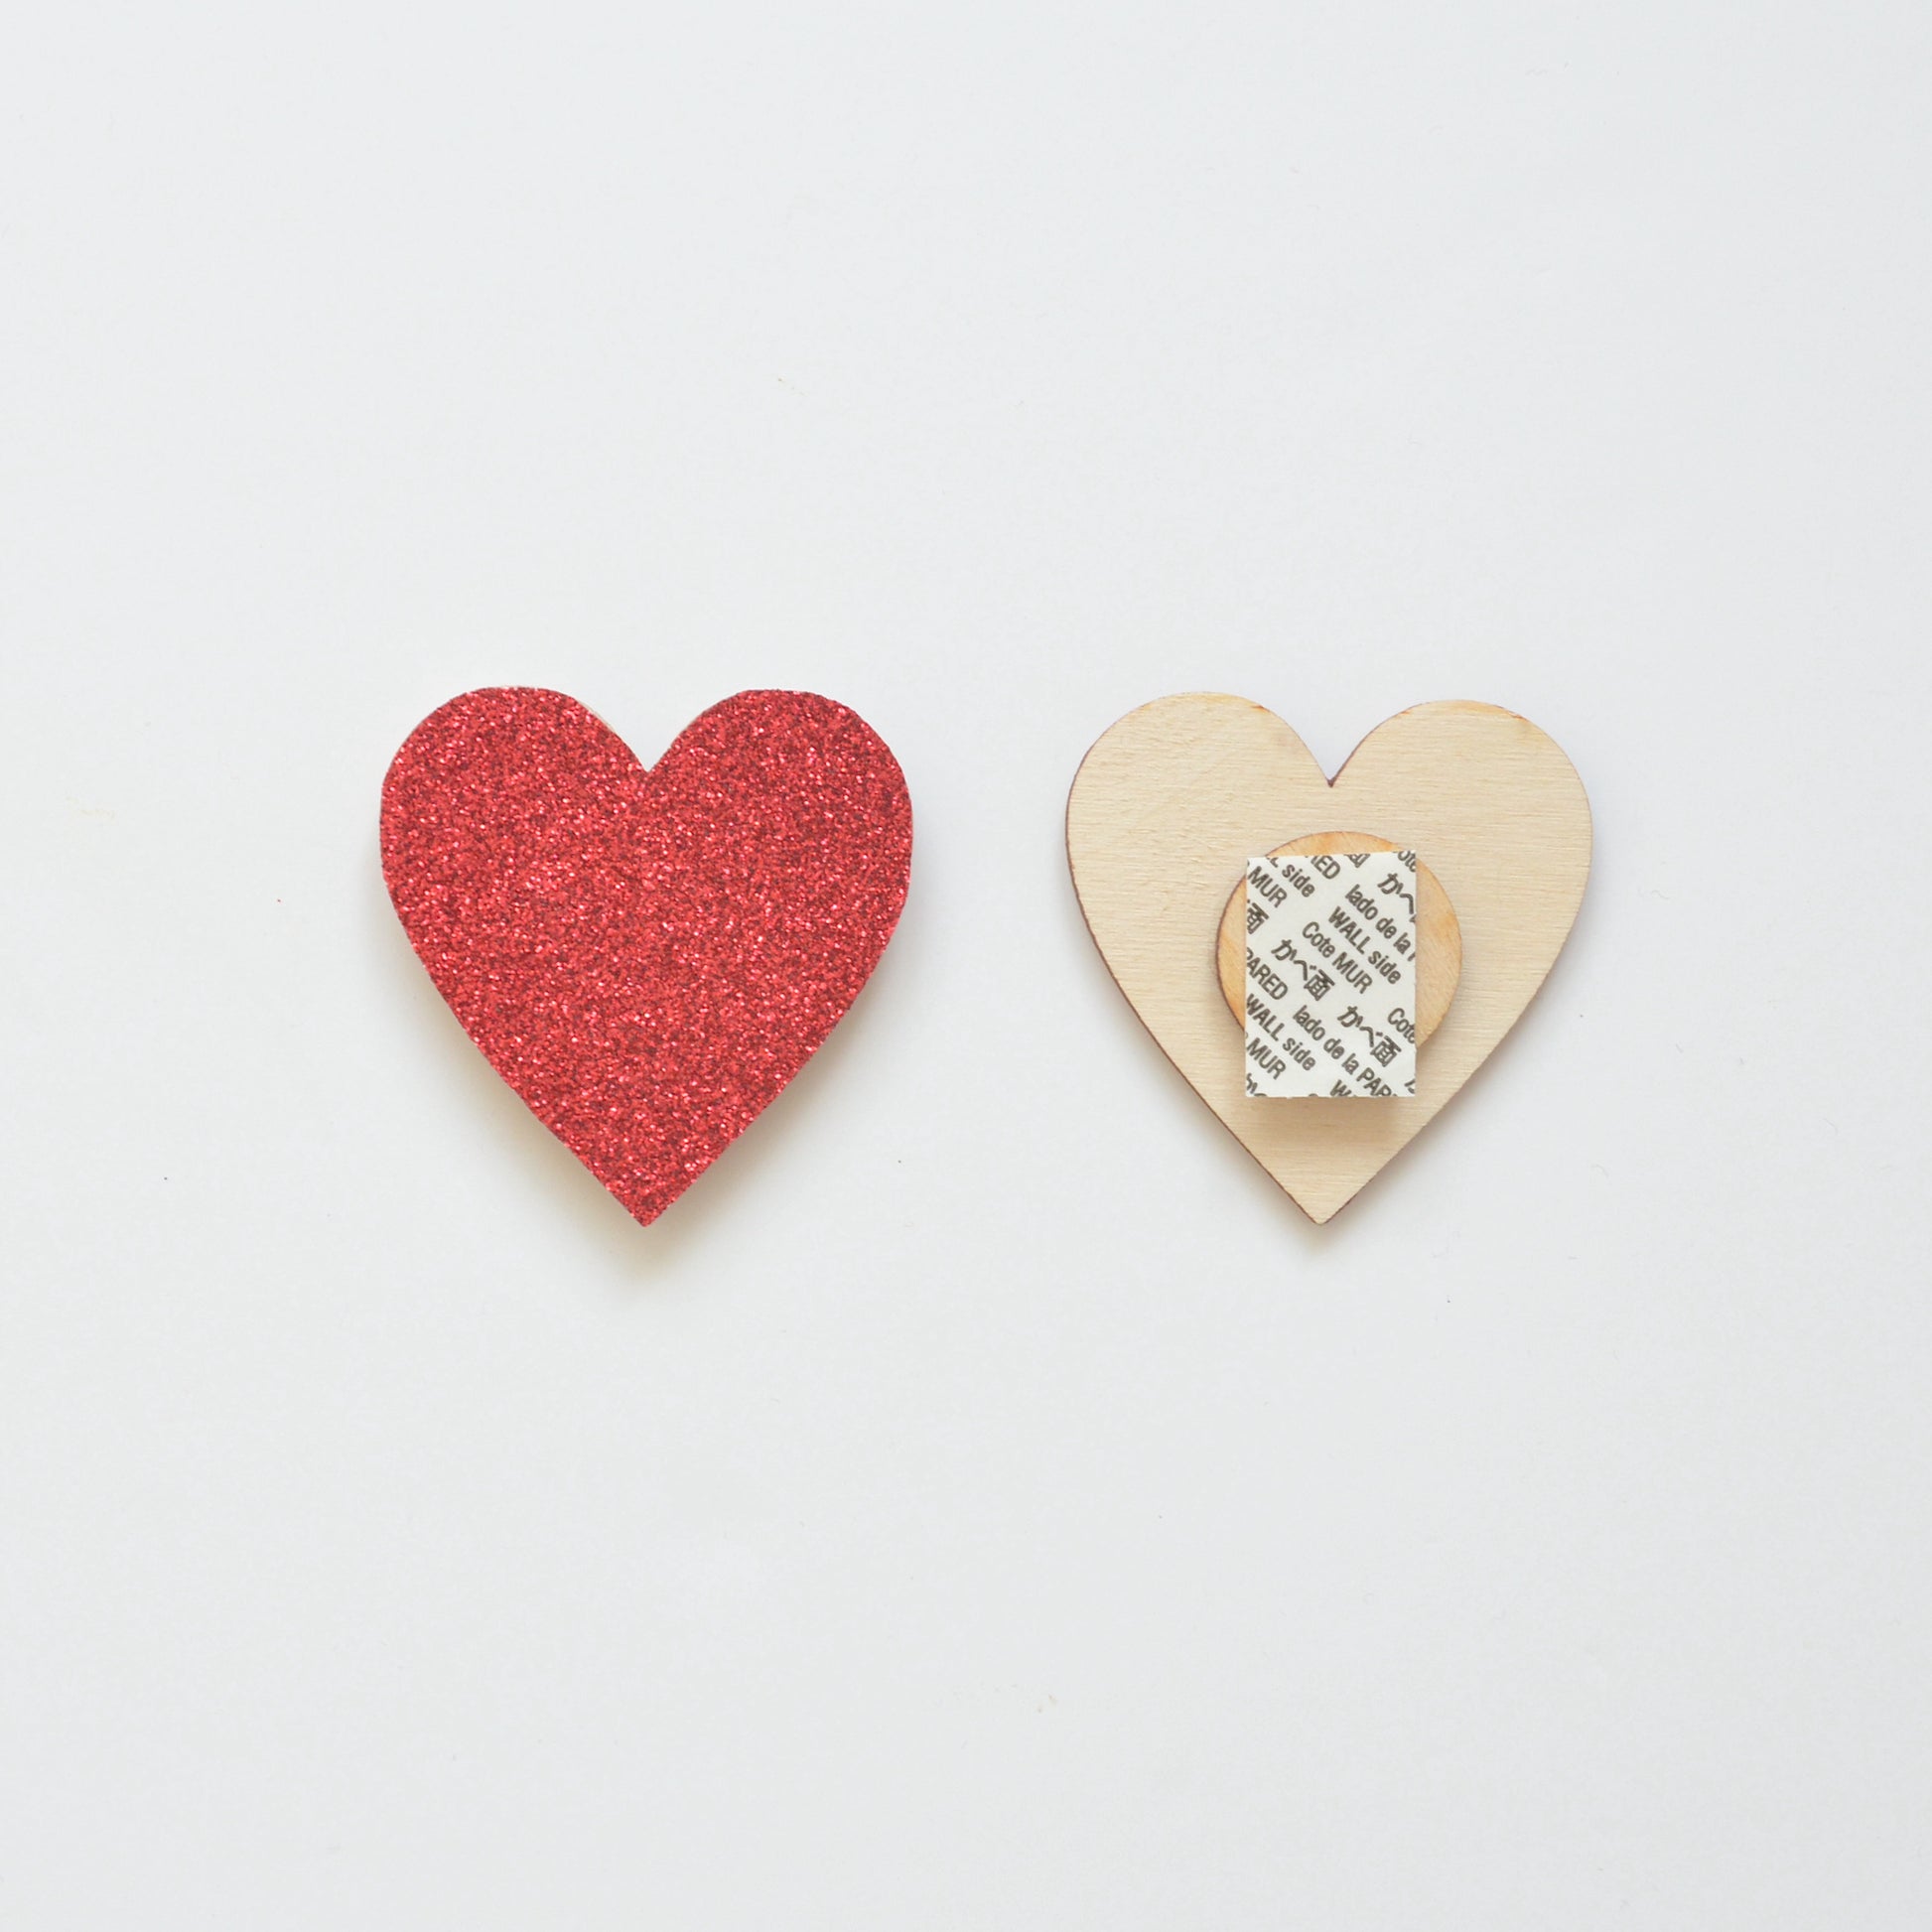 Red heart hooks for hanging in kids bedrooms